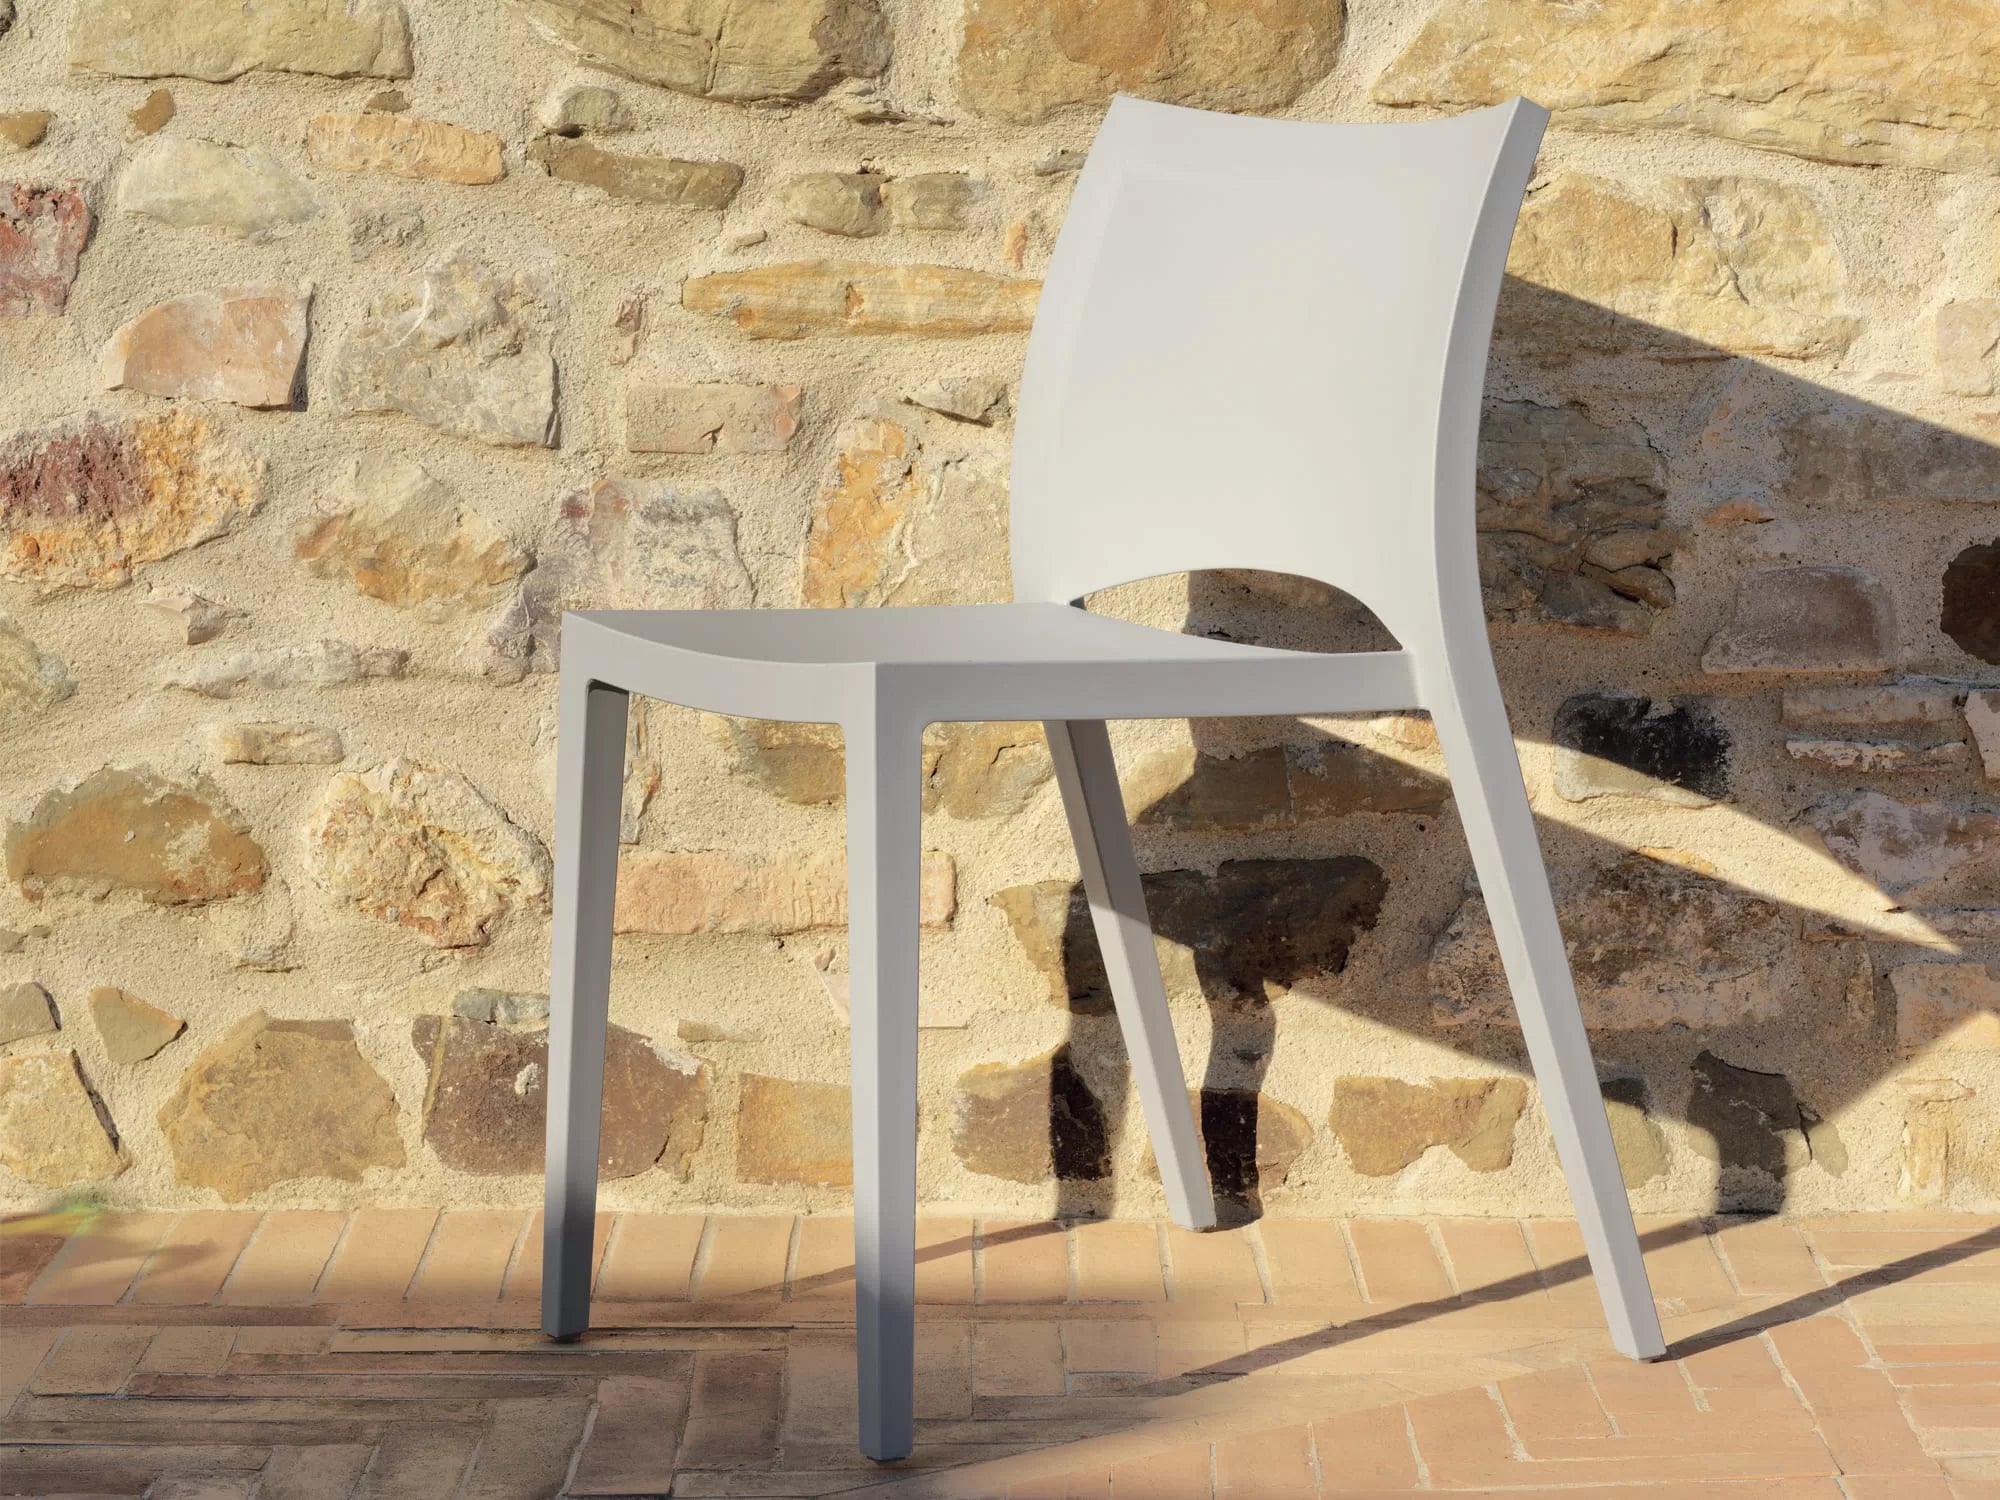 Aqua Stackable And Outdoor Chair In Polypropylene